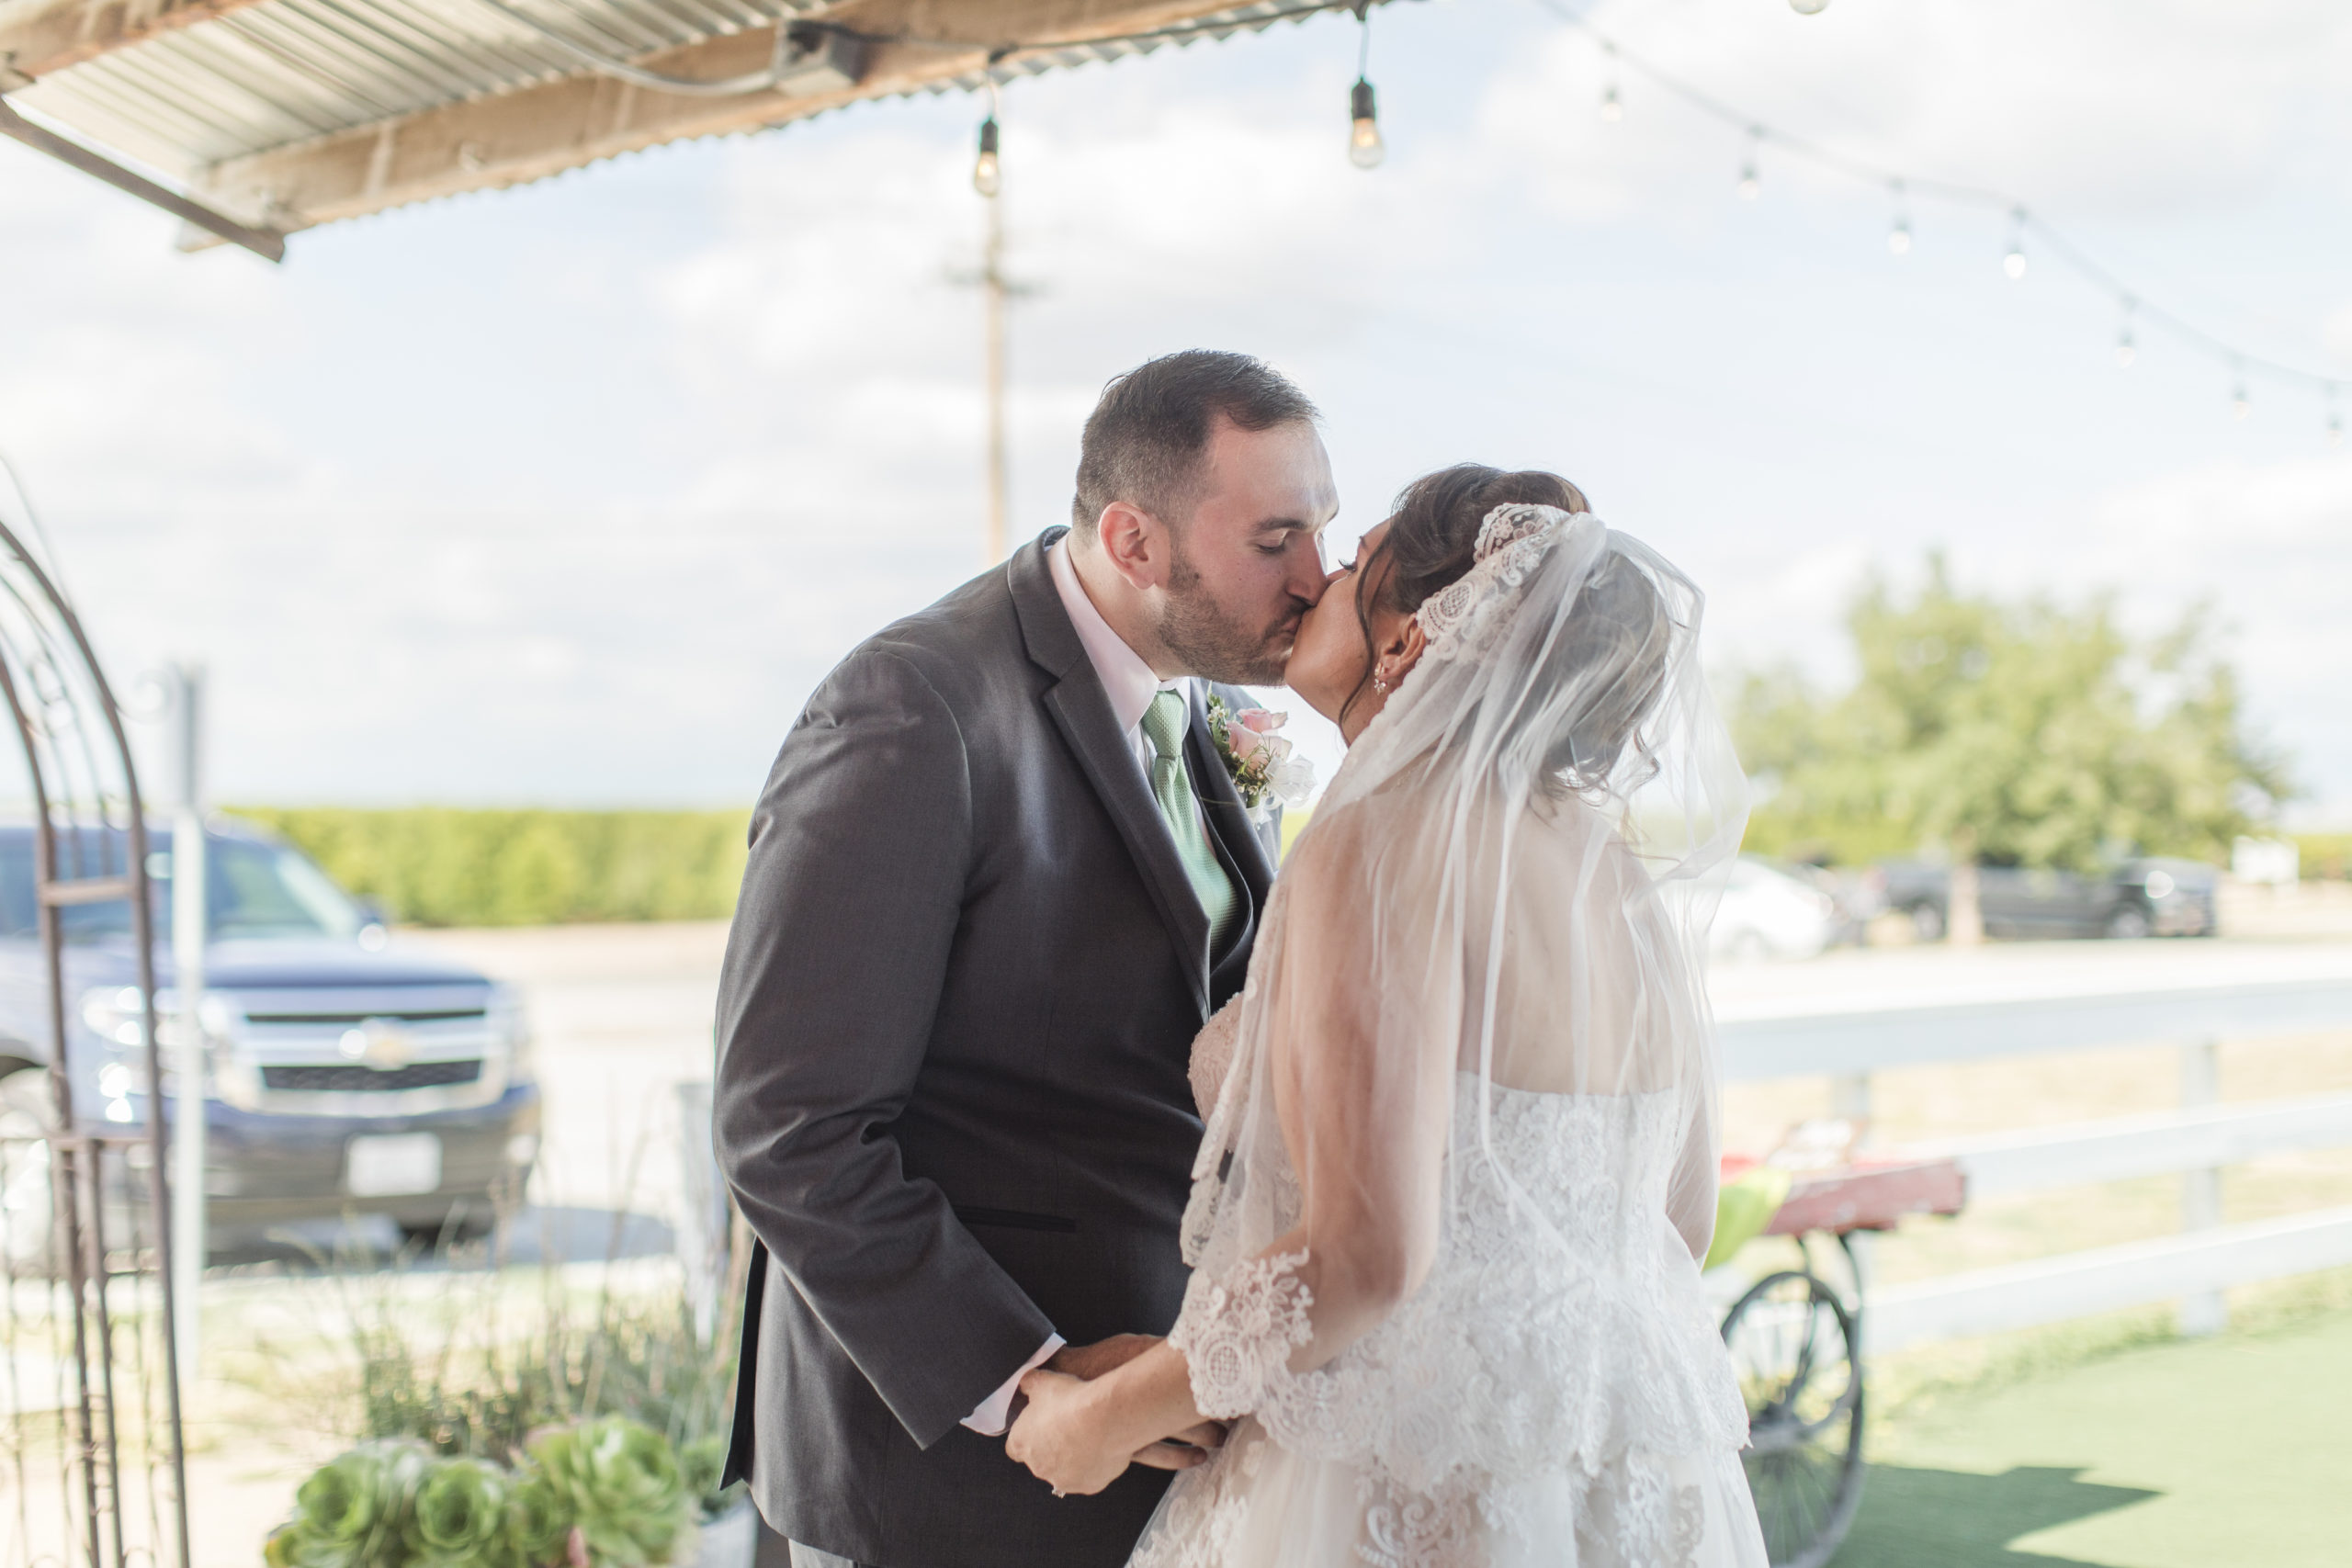 A teal Branch and Vine Wedding first look